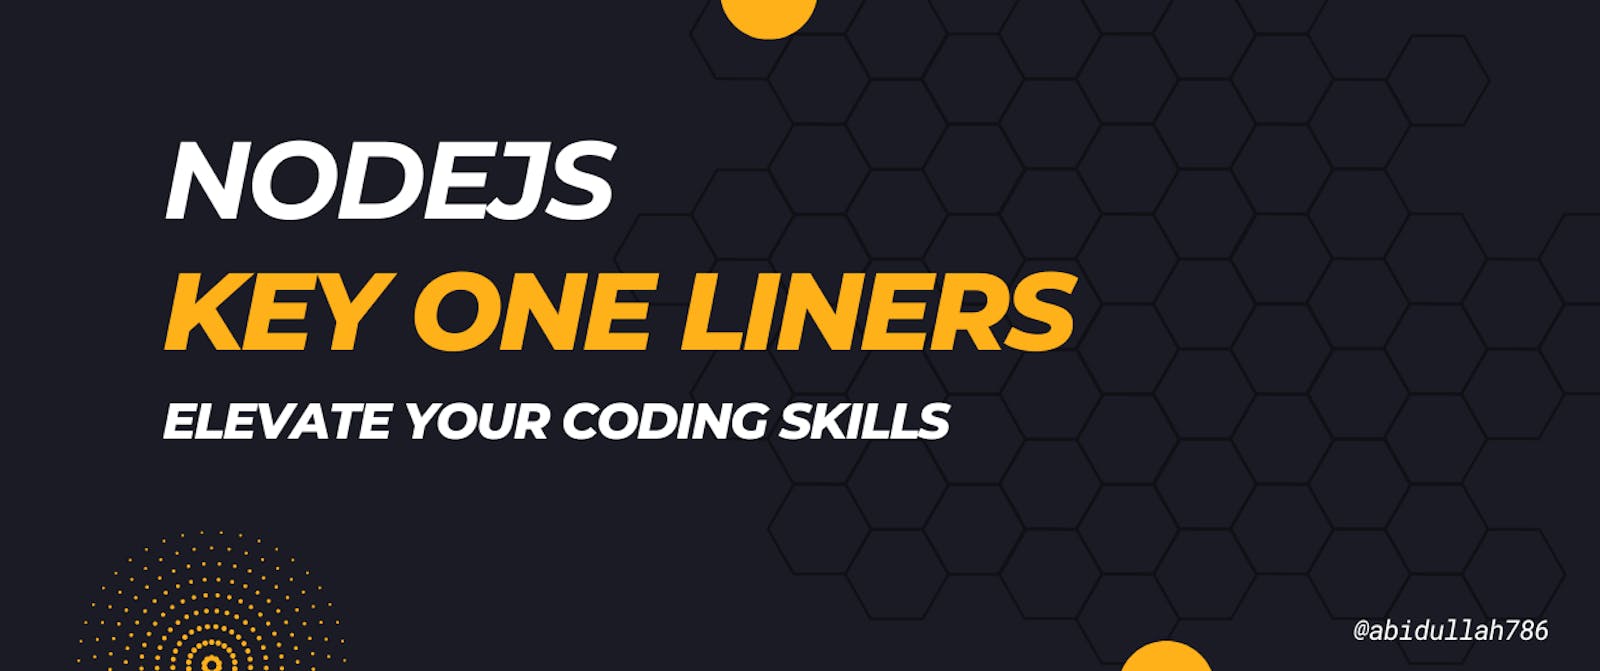 Node.js Key One-Liners to Elevate Your Coding Skills